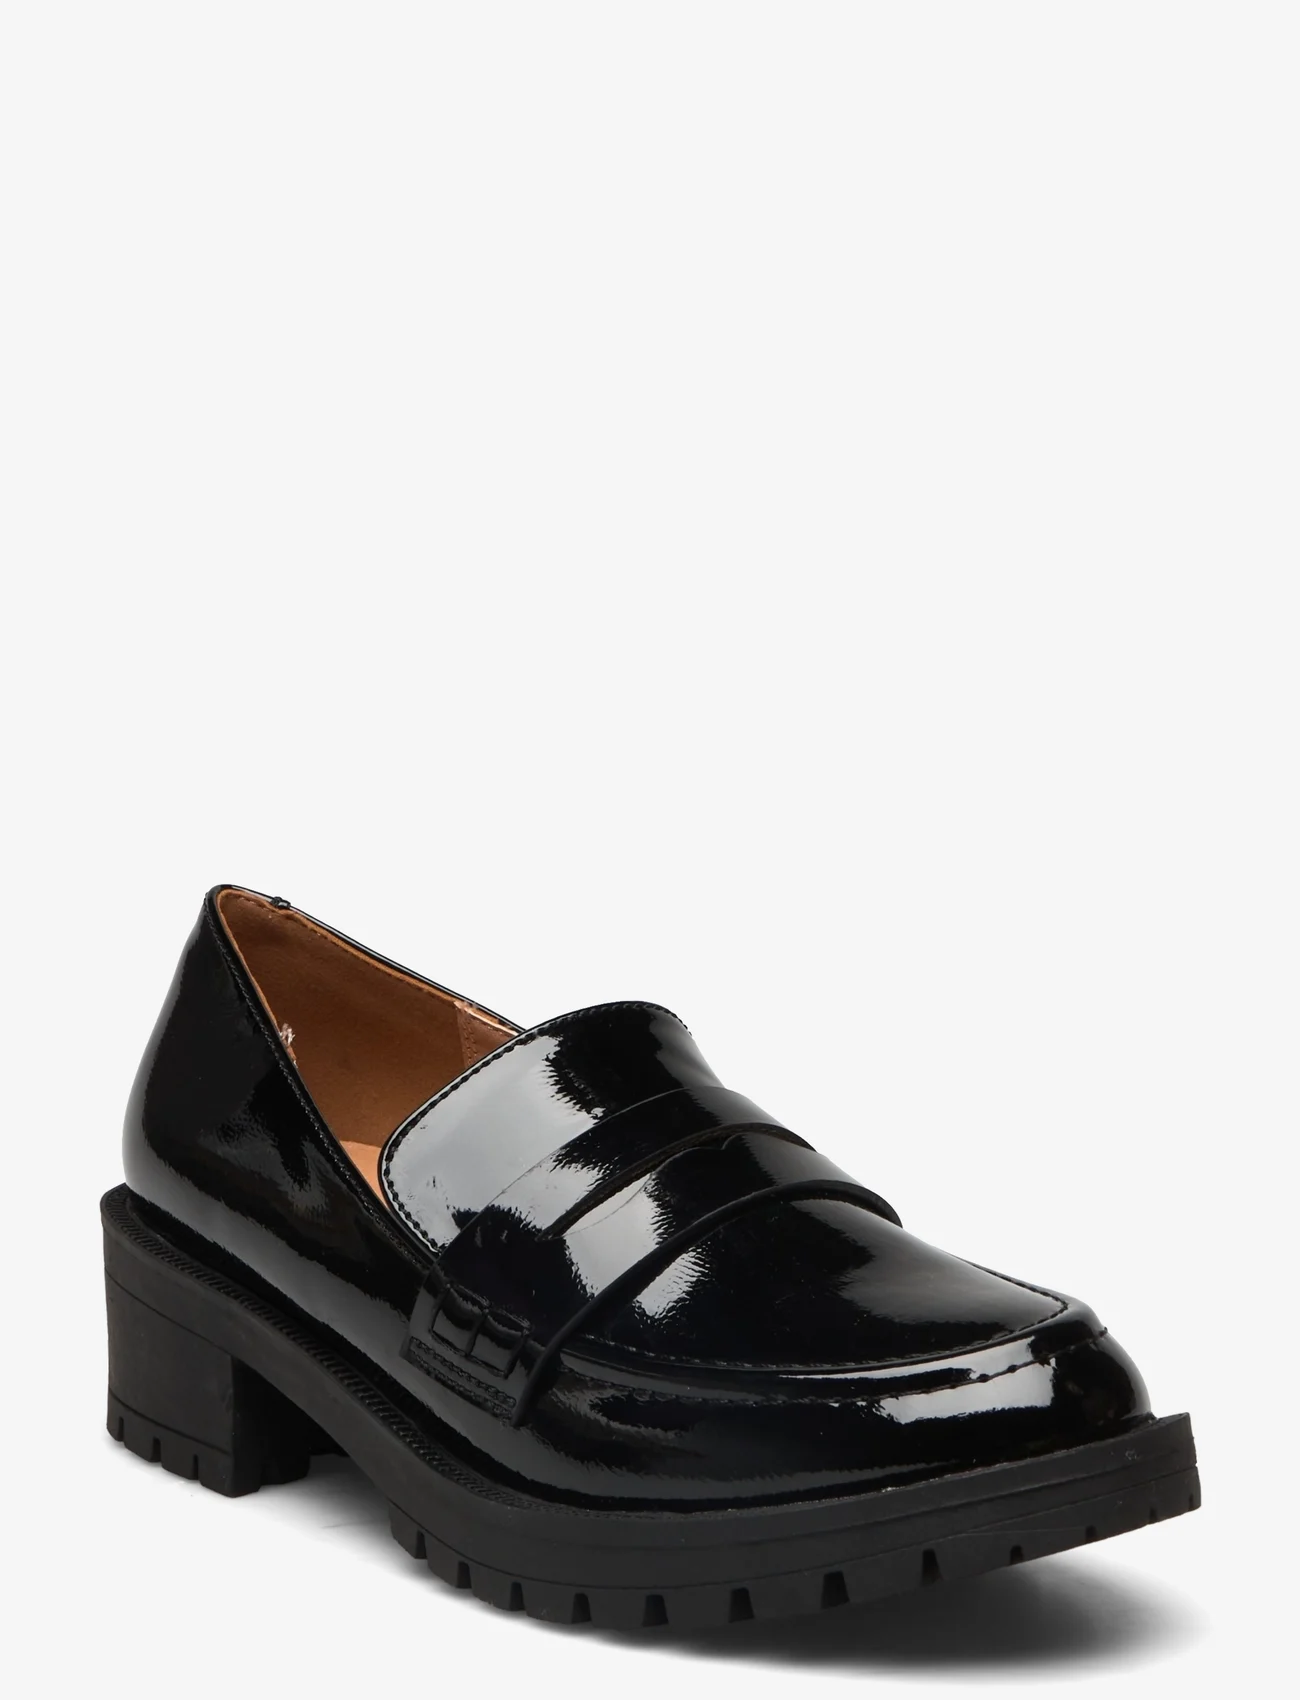 Bianco - BIAPEARL Simple Penny Loafer Patent Aquarius - loafers - black - 0